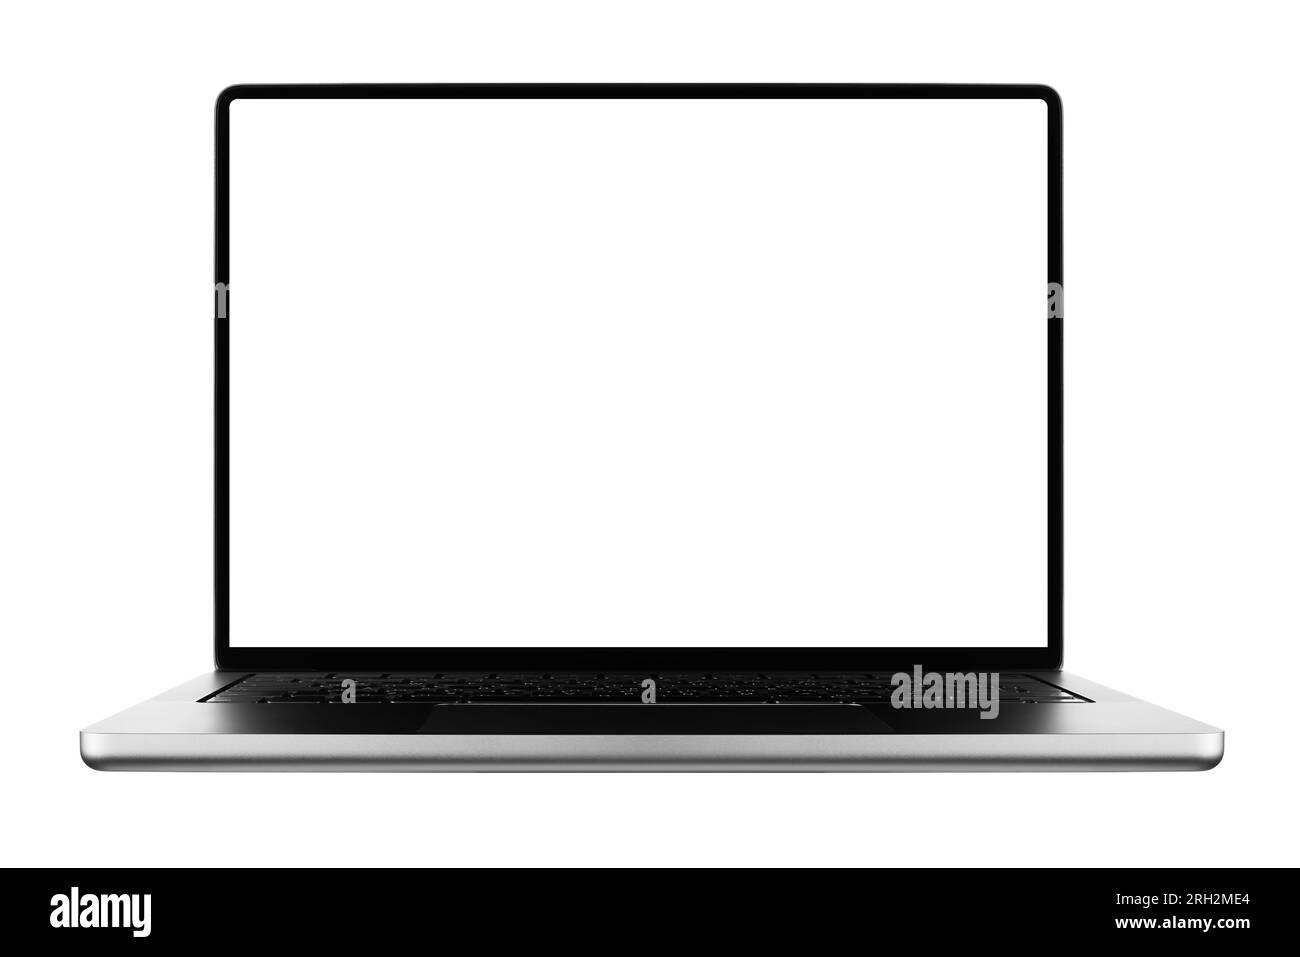 Modern Laptop Mockup with a white screen isolated on a white background, Based on a High-quality Studio shot, new Laptop frameless design concept Stock Photo